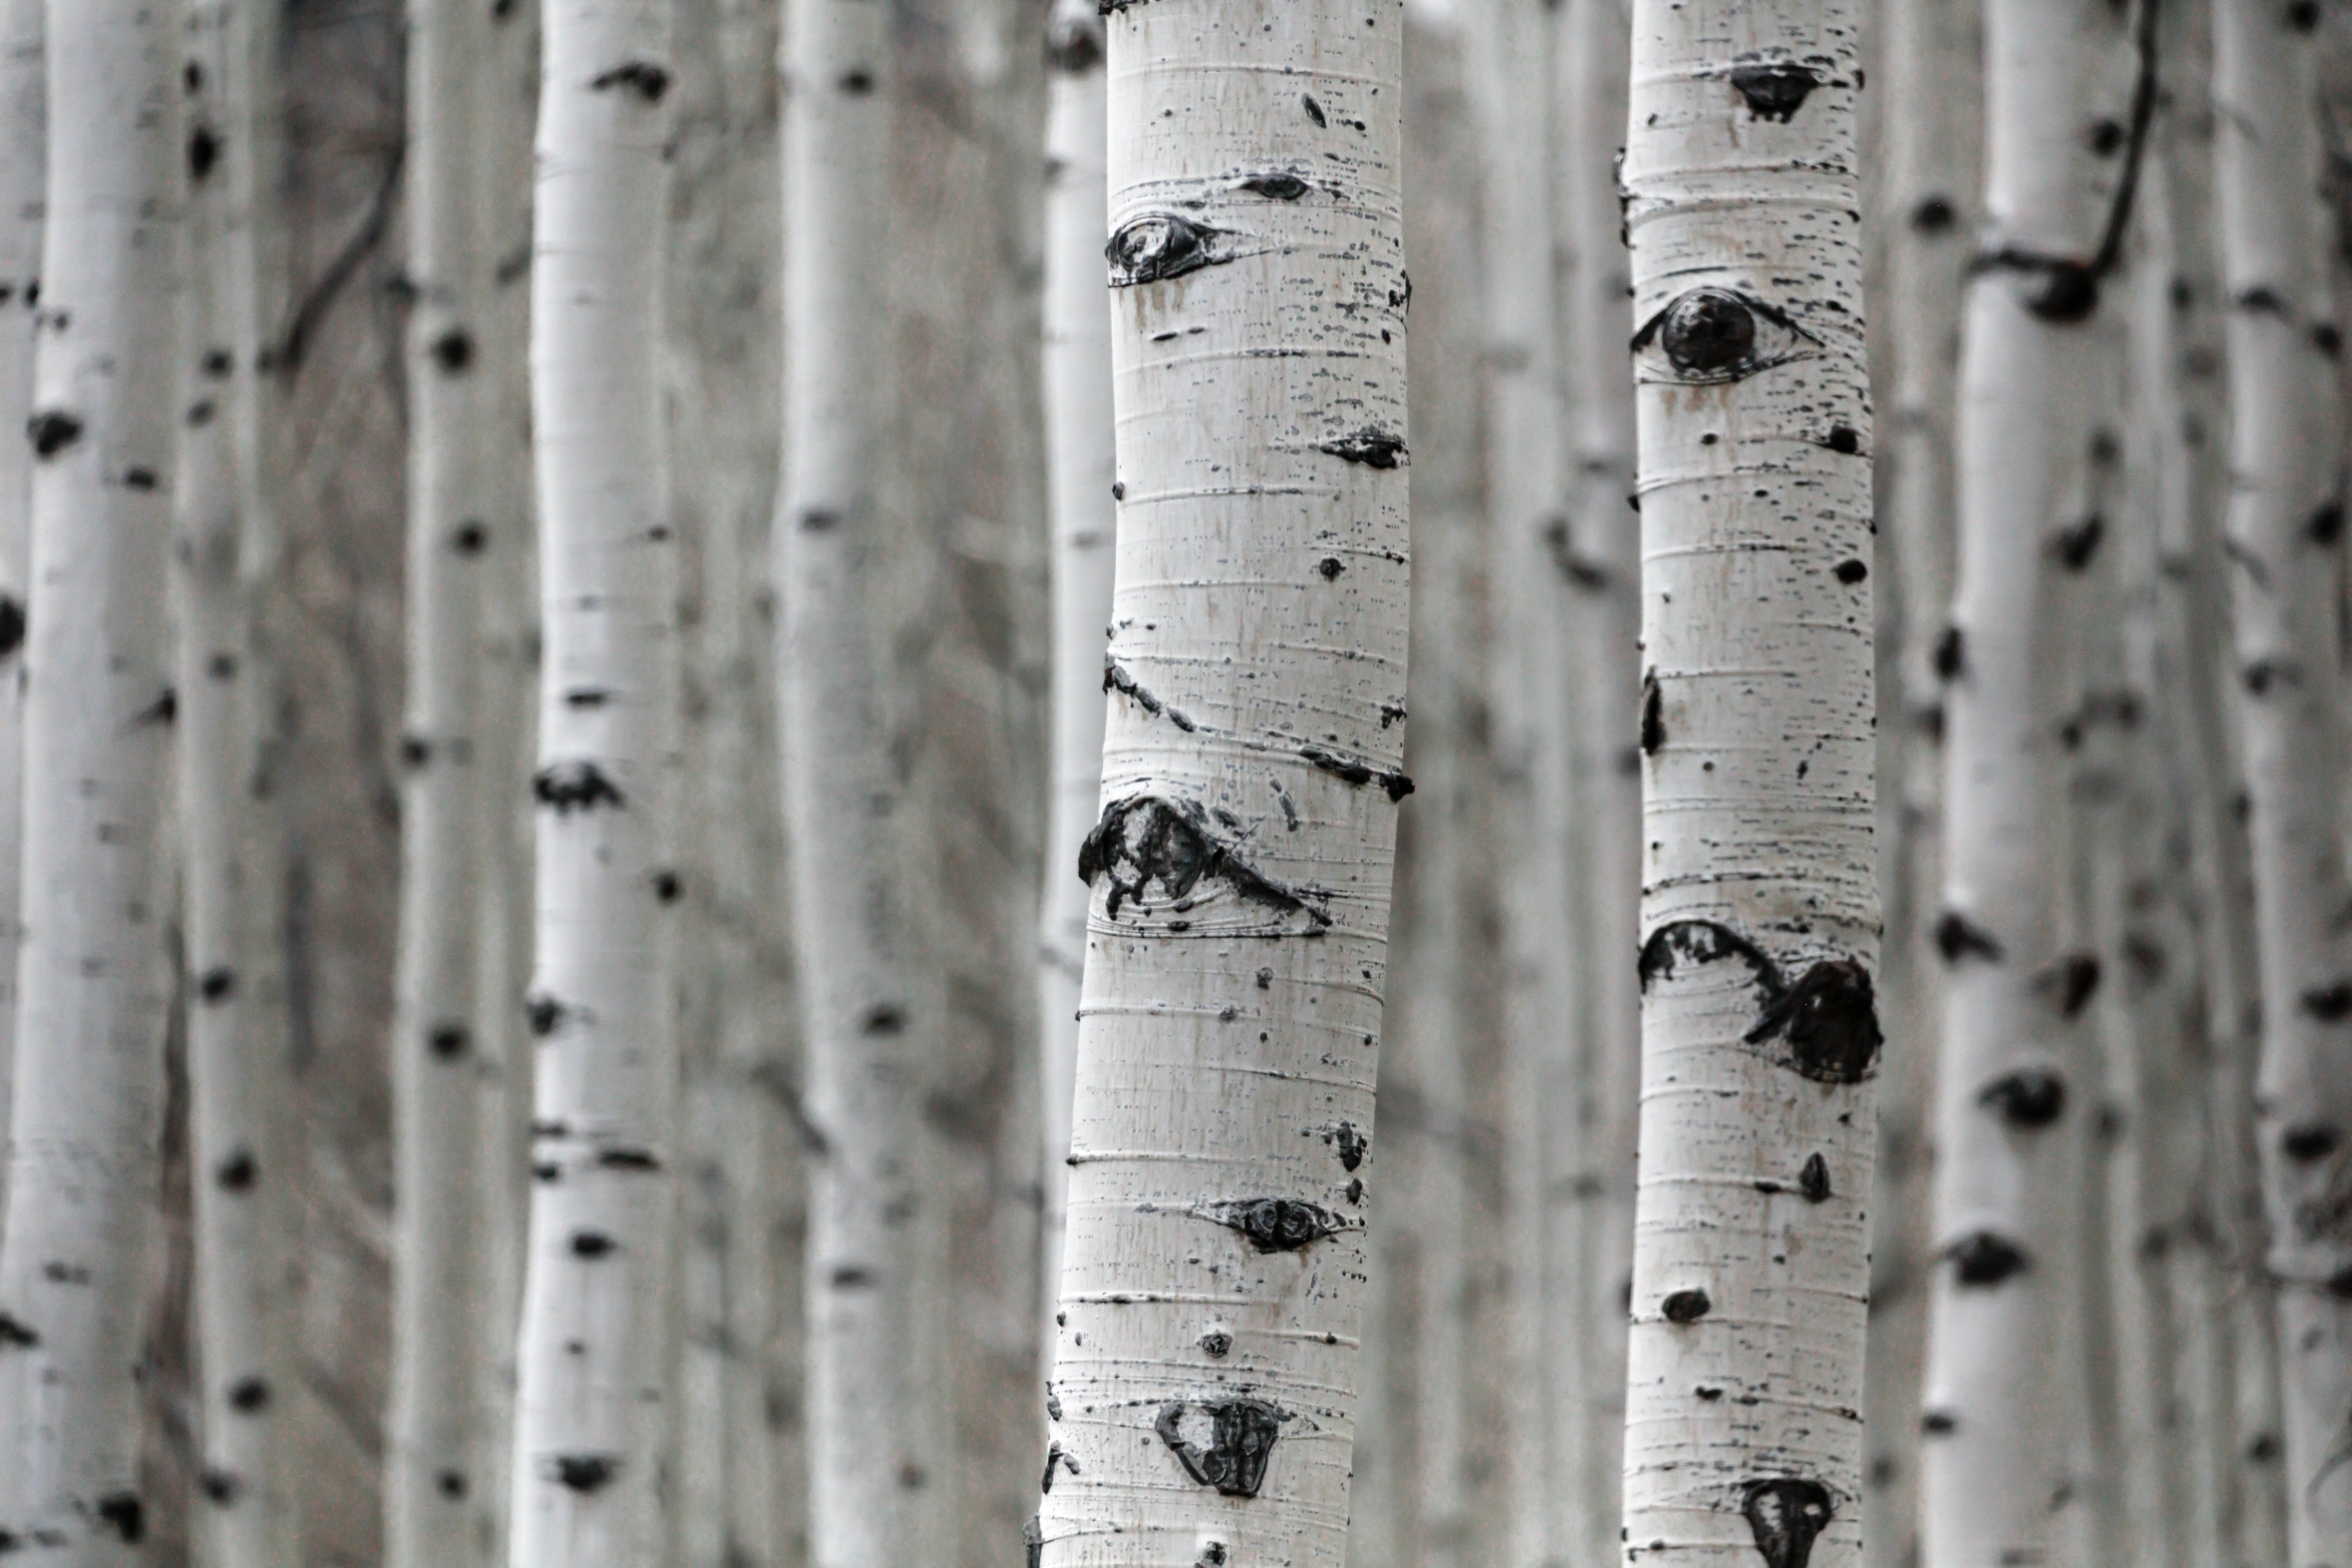 a cluster of aspen trees with no visible leaves